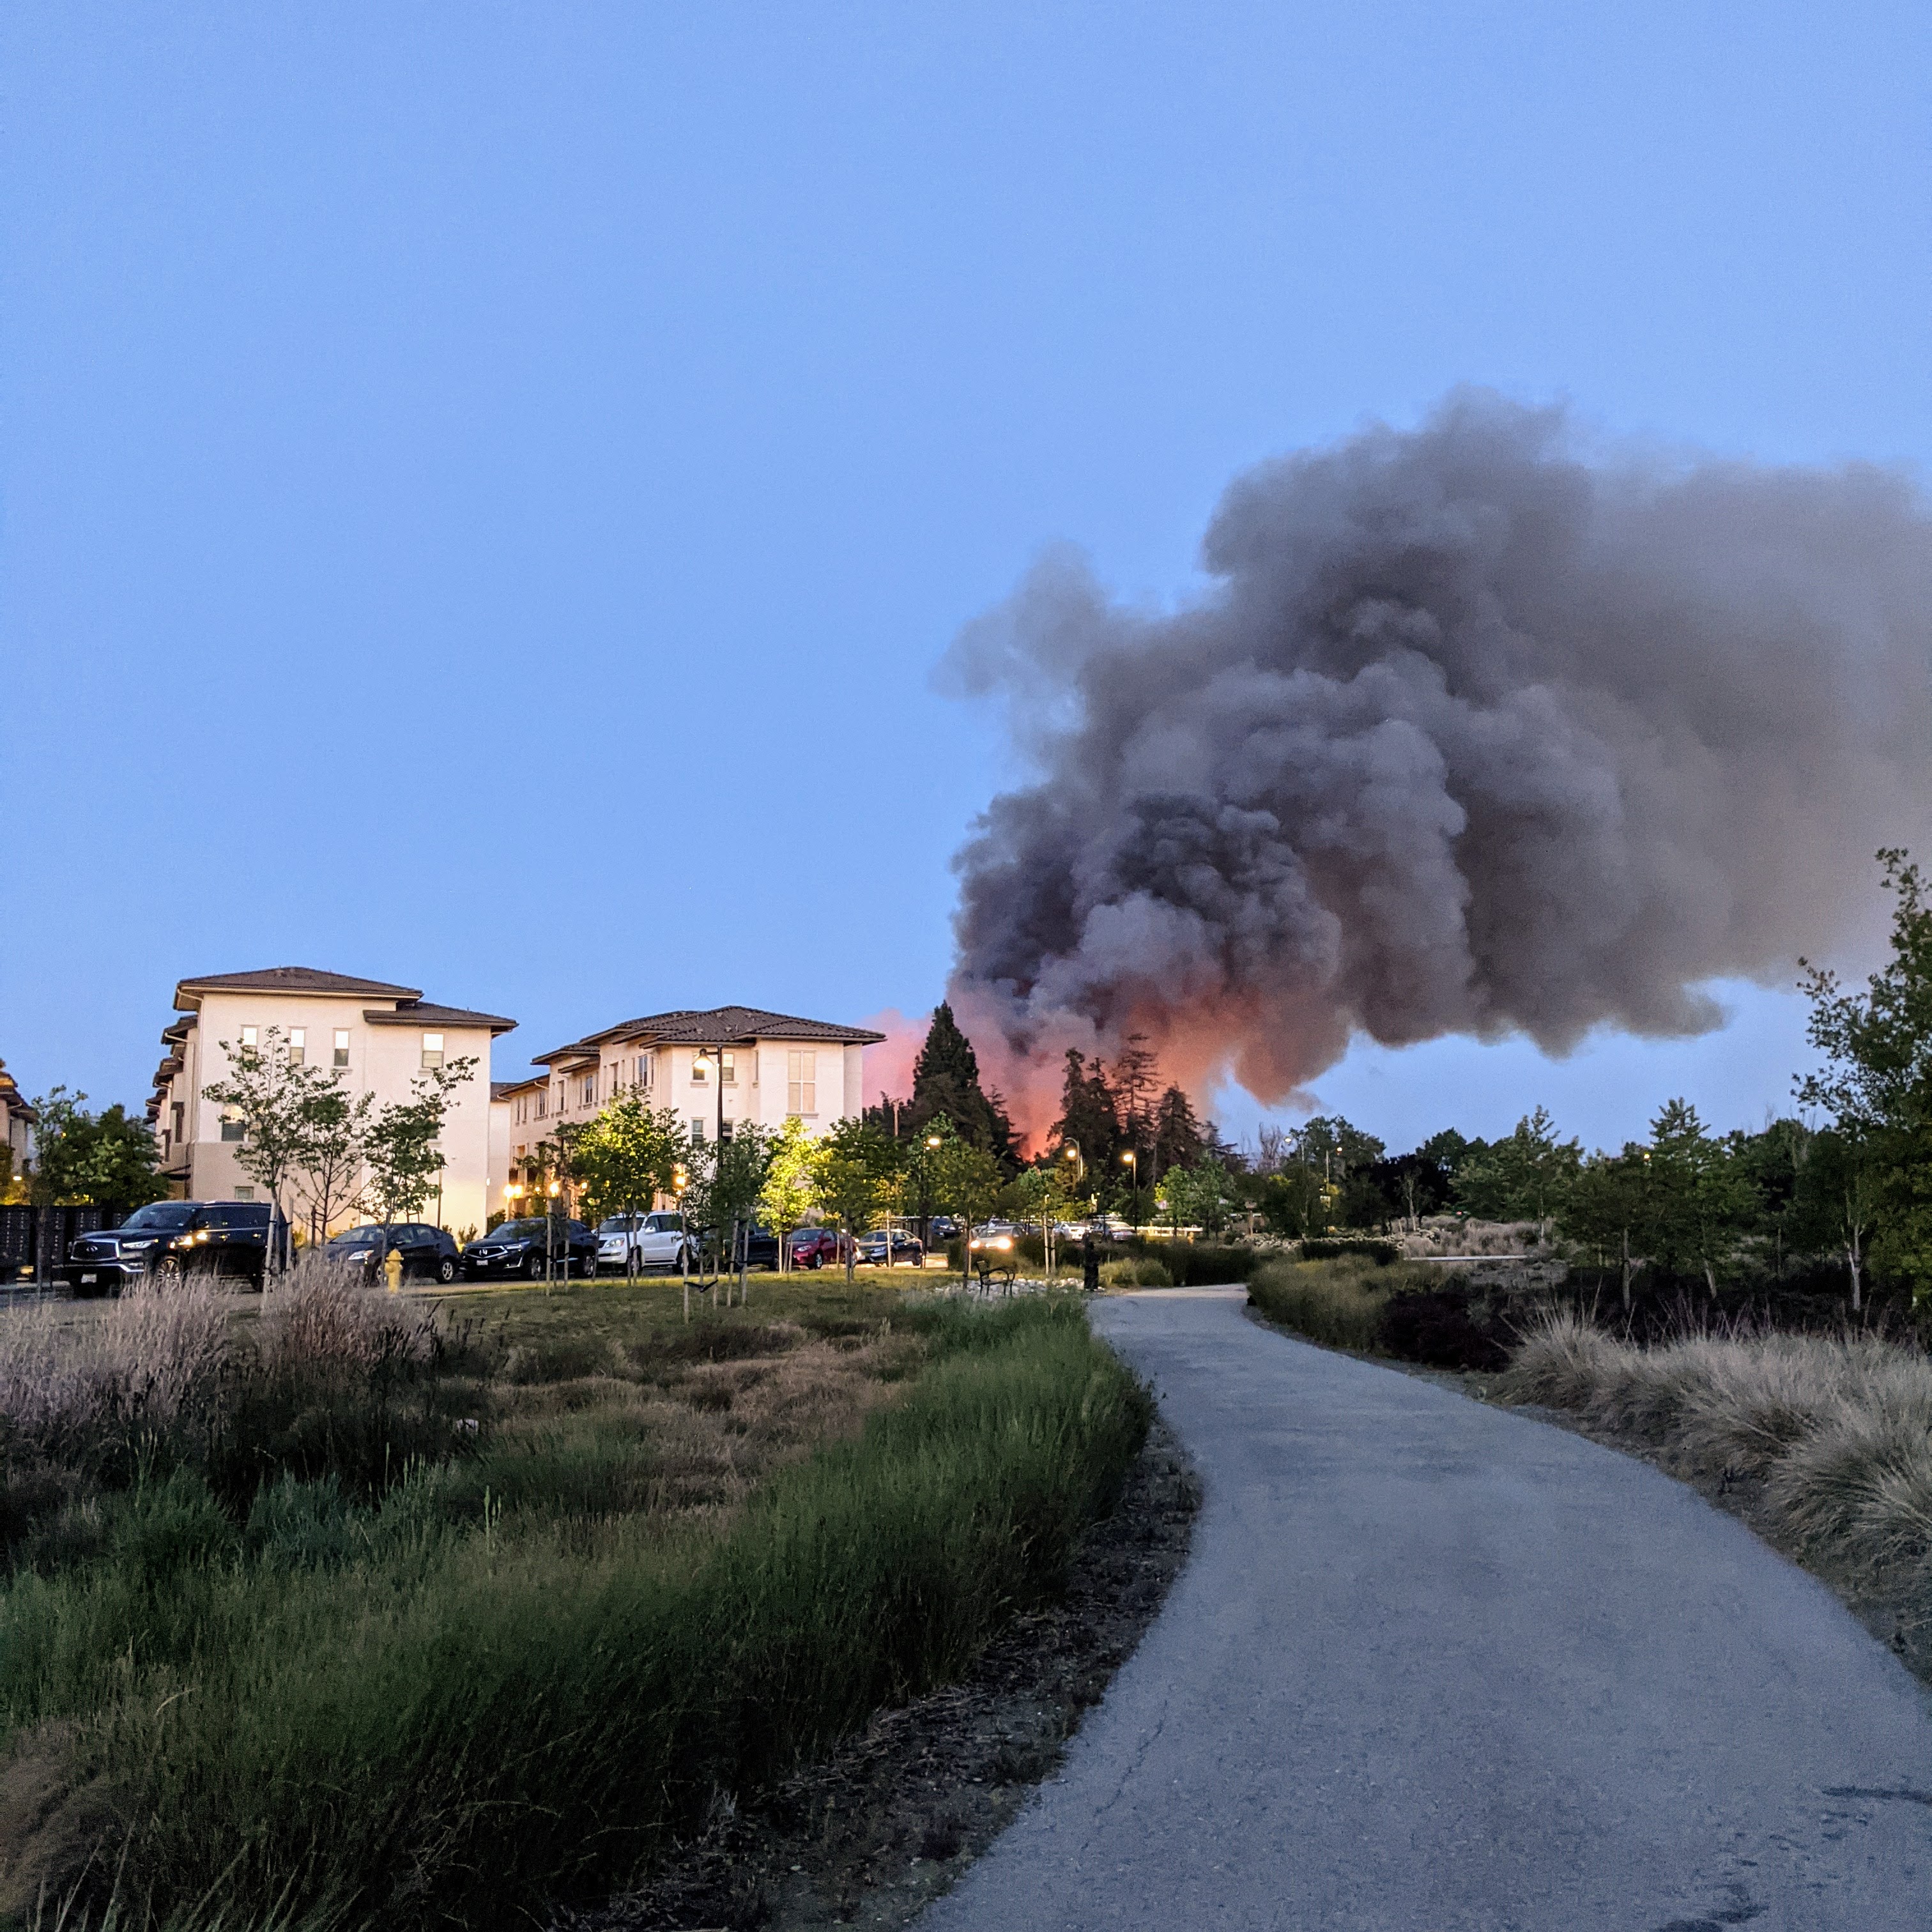 A fire started in the creek area near our community